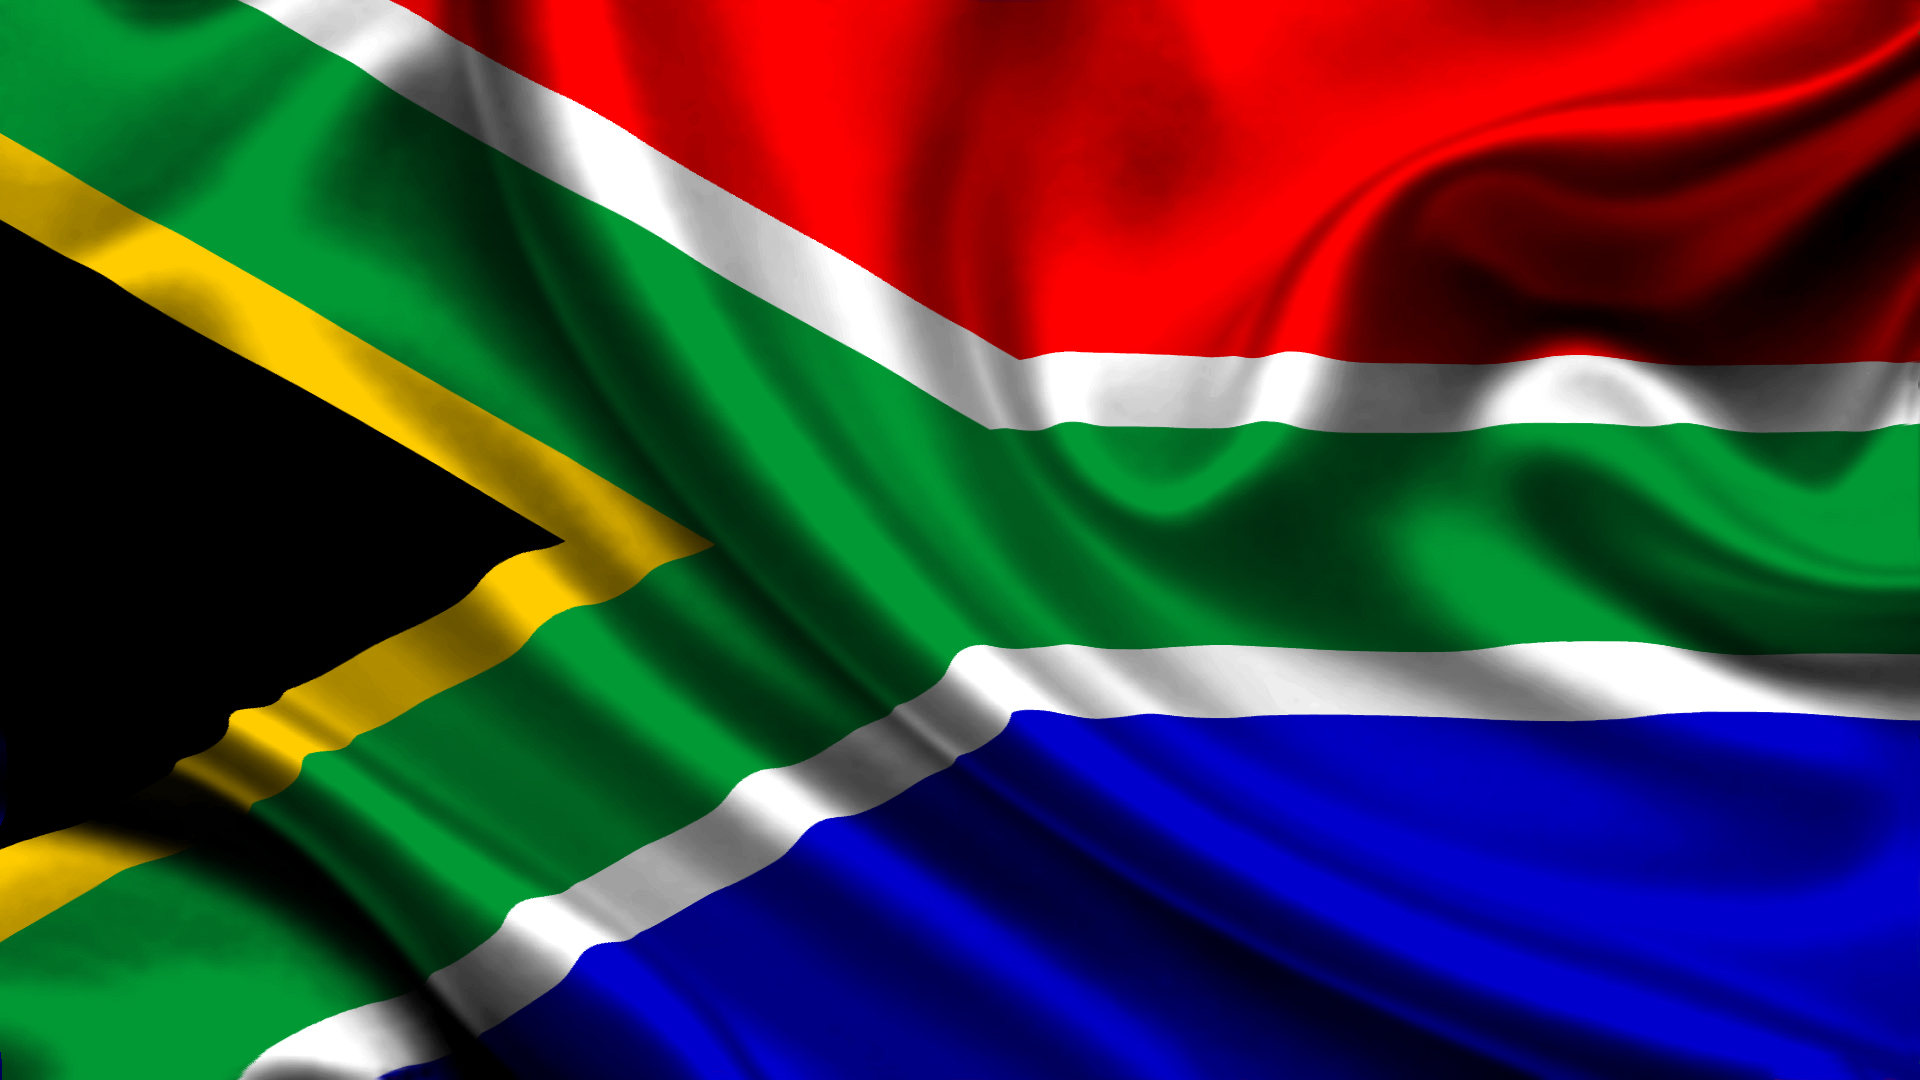 South Africa aiming to take back title as Africa’s leading destination